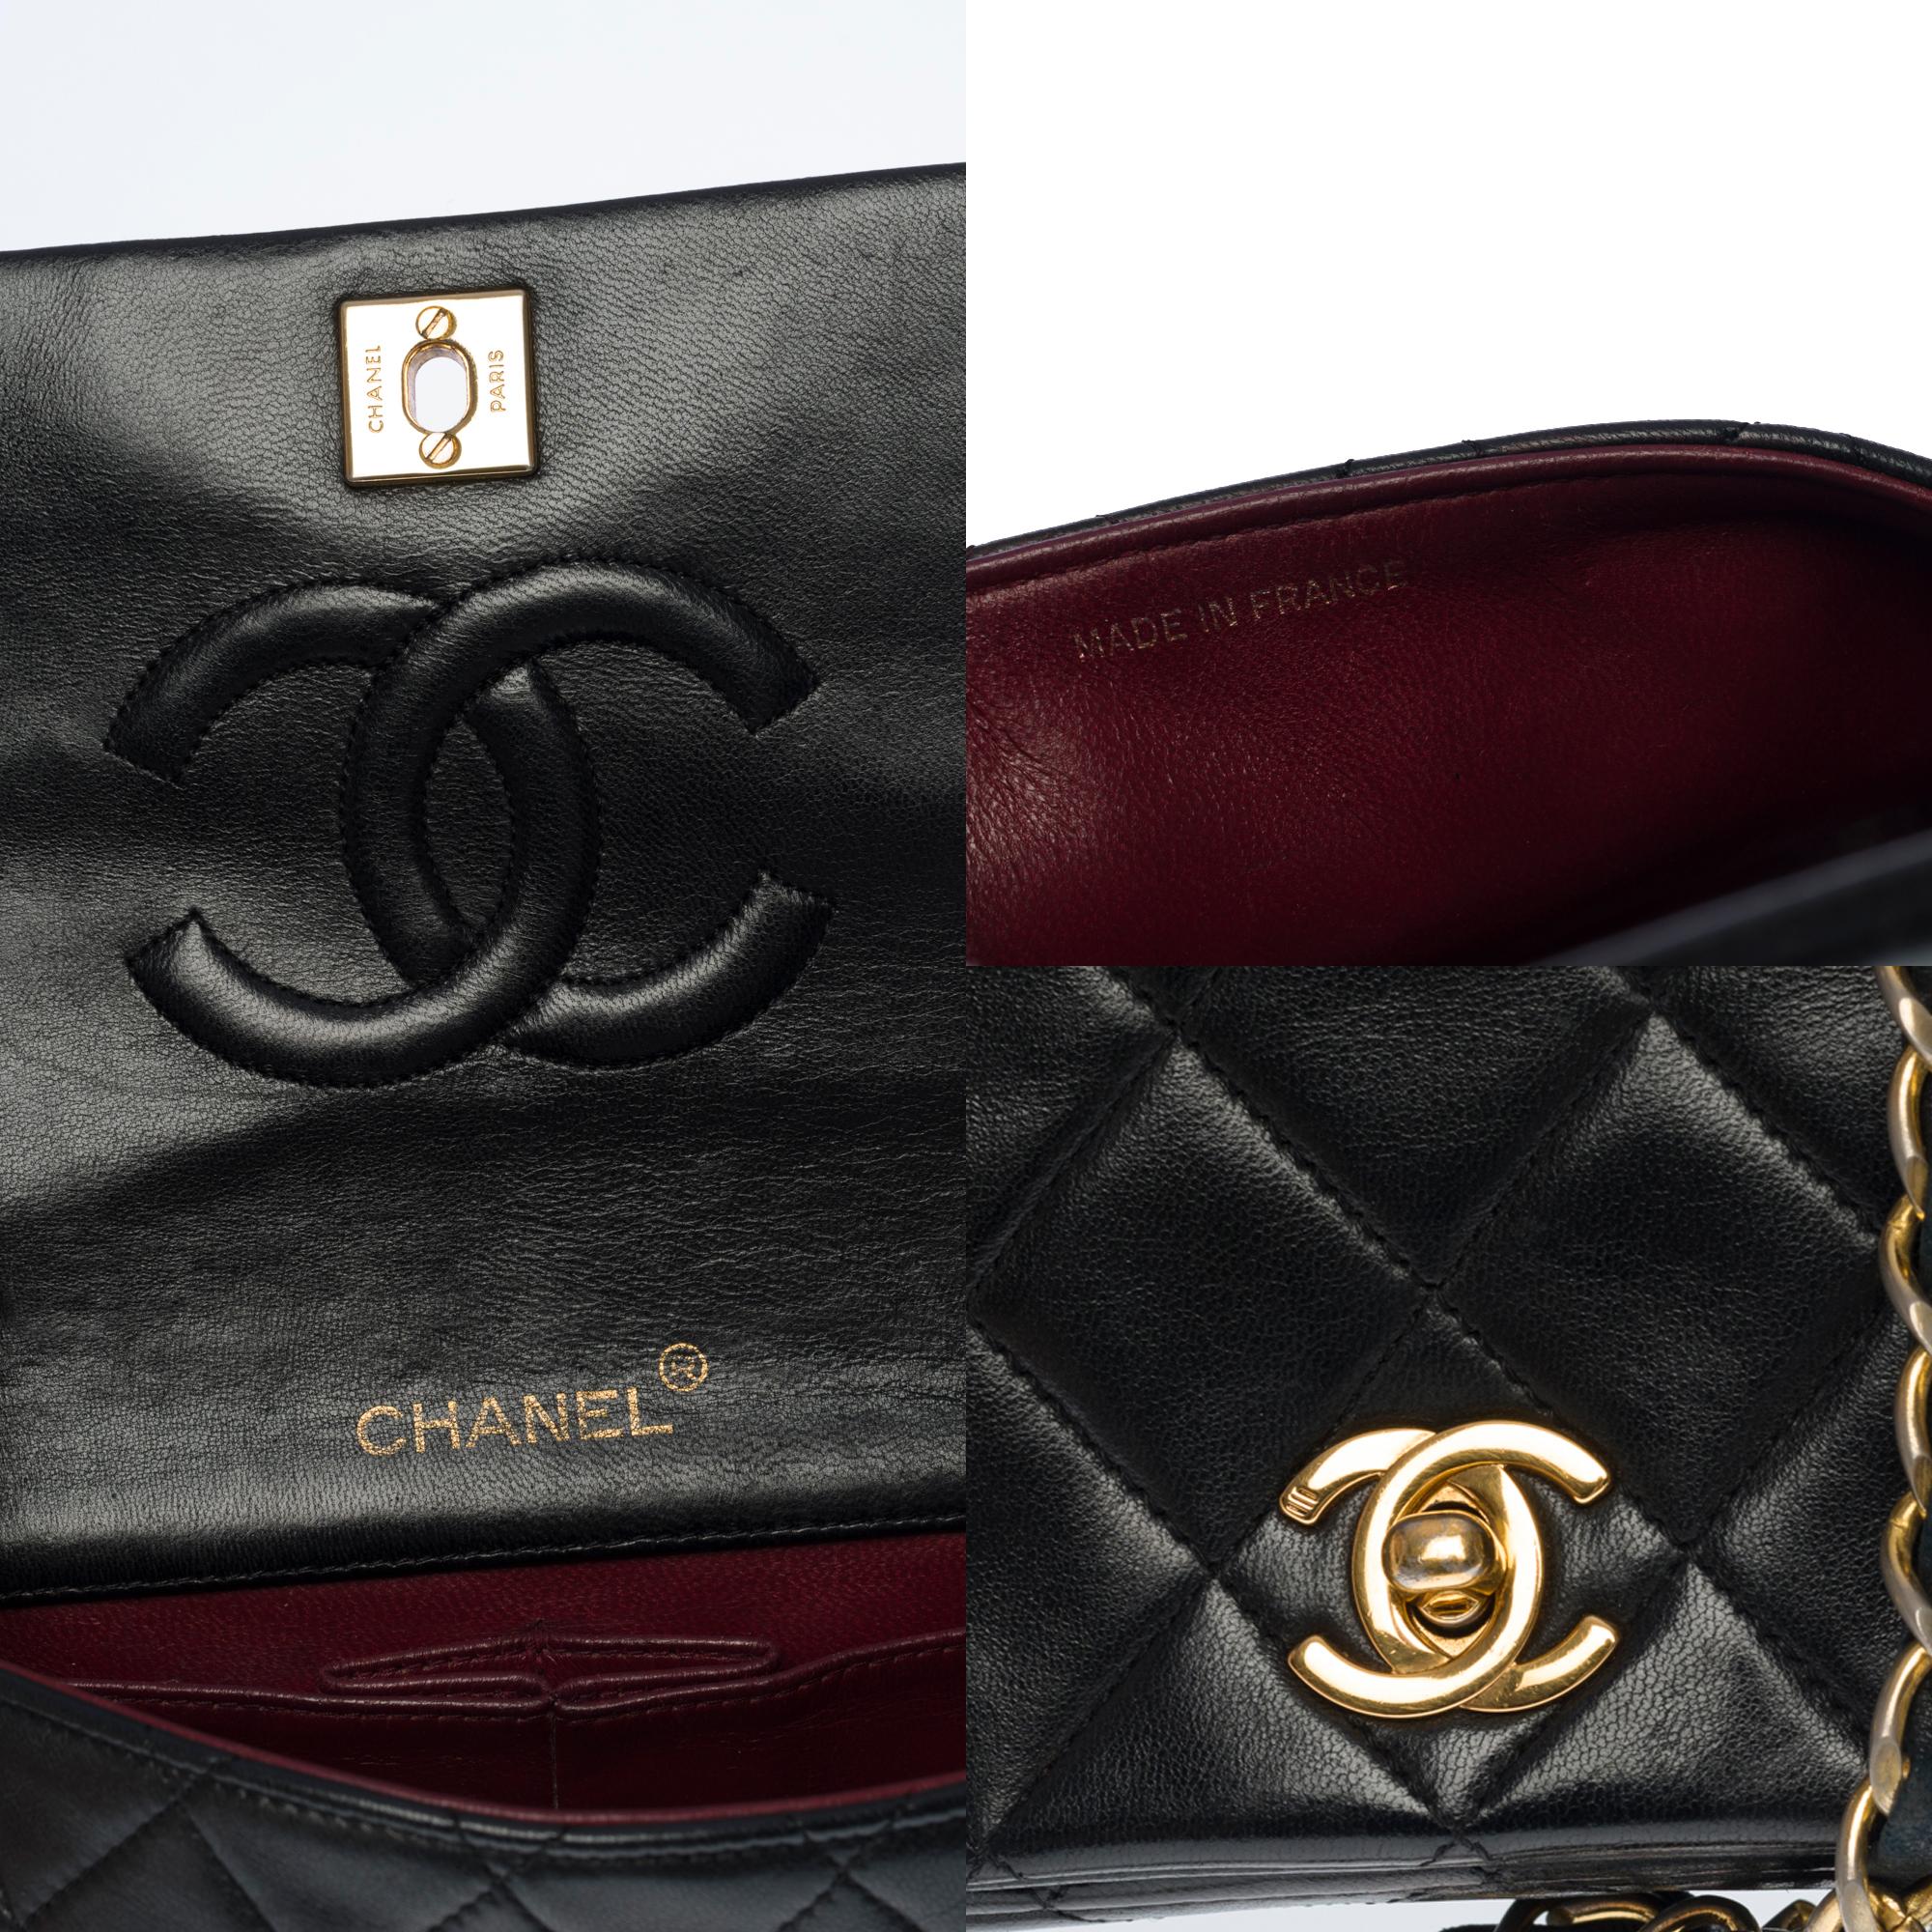 Chanel Classic Mini Full Flap shoulder bag in black quilted lambskin leather, GHW 1